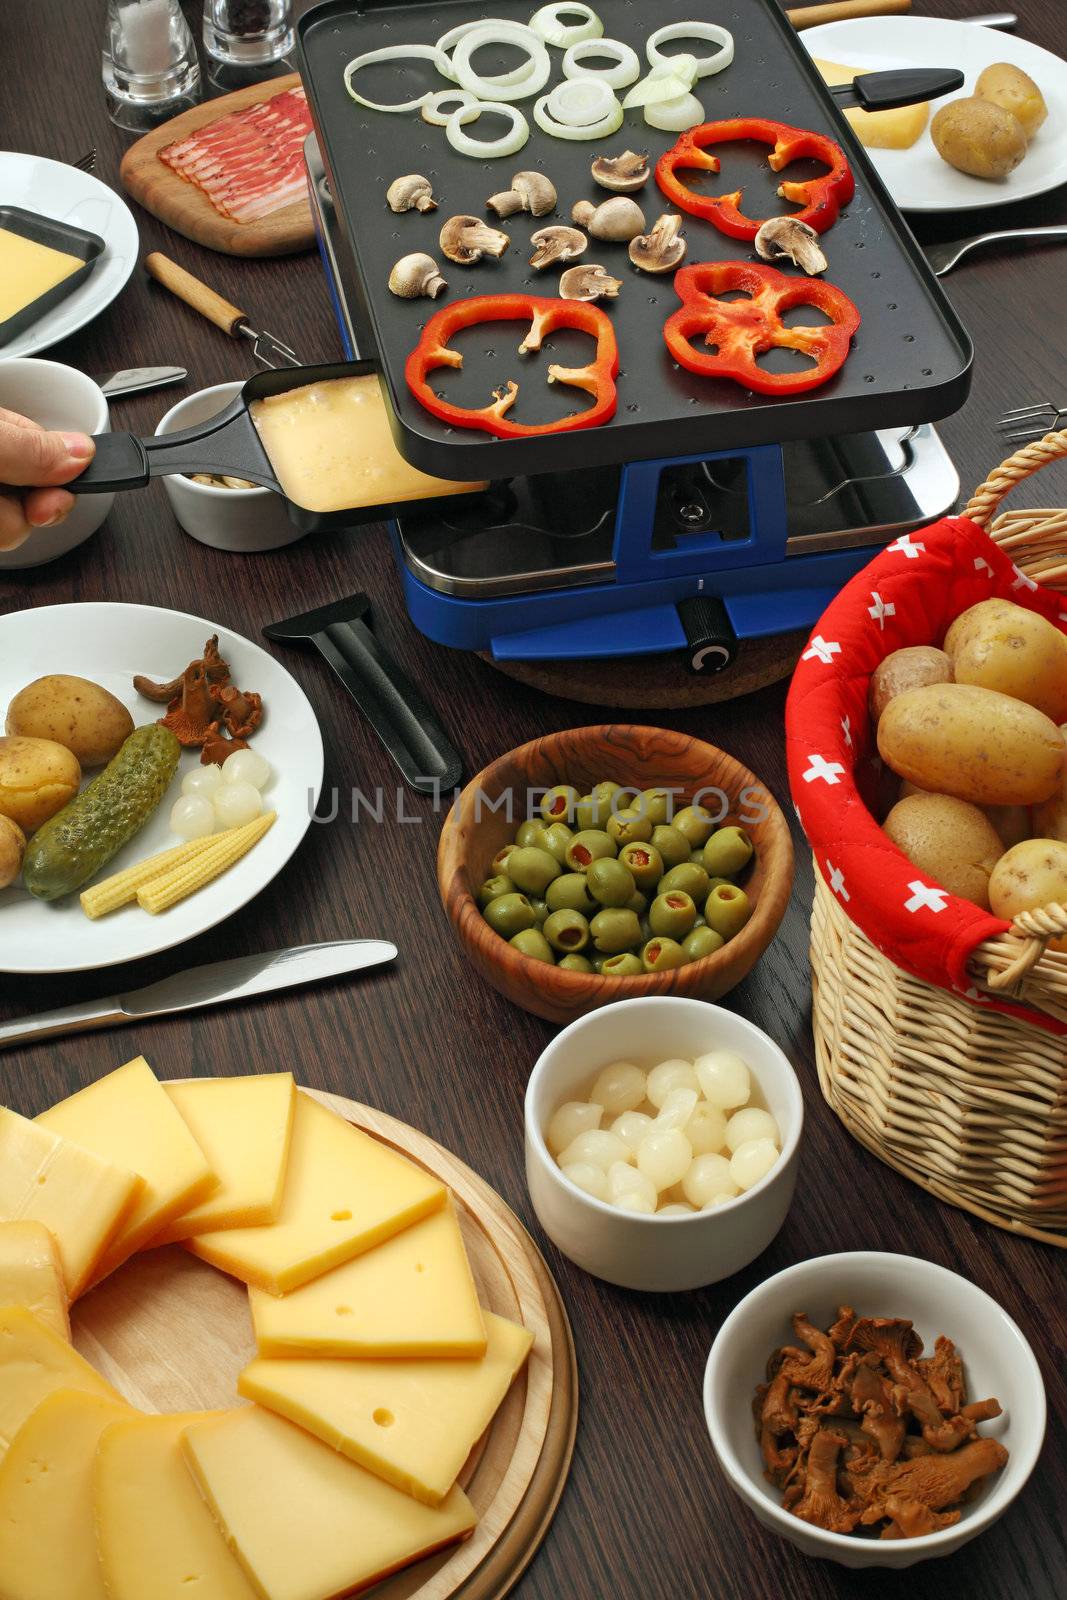 Photo of a table full of items for a traditional Raclette dinner, including slices of cheese, white onions, potatoes, olives, mushrooms, and the grill with the utensils.
